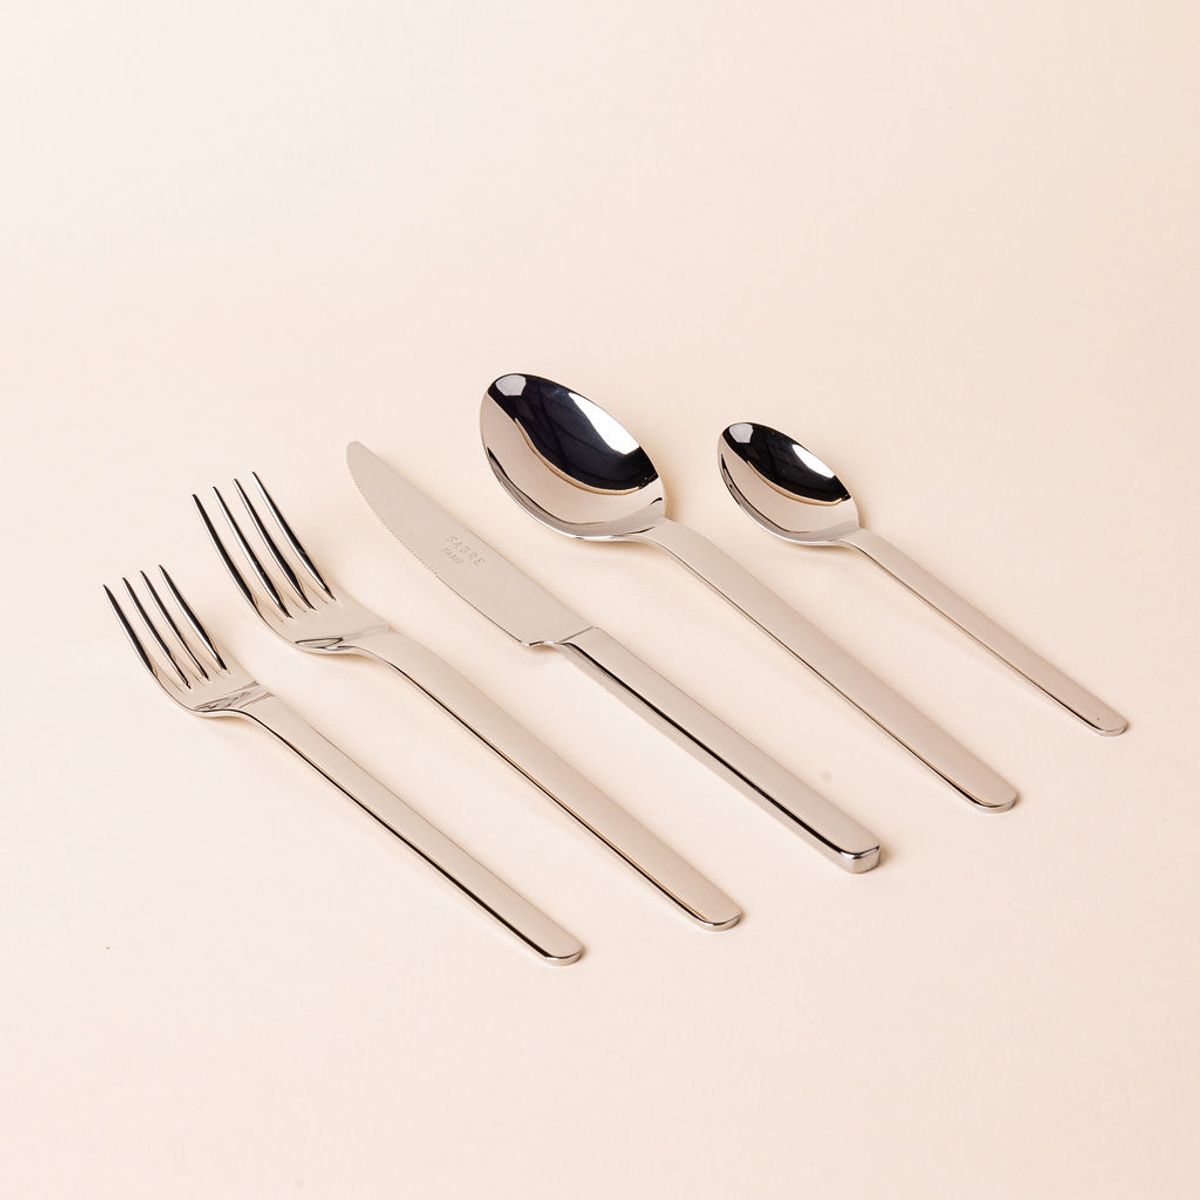 Classic minimal shiny stainless steel flatware arranged in a row with a salad fork, dinner fork, knife, spoon, and soup spoon.